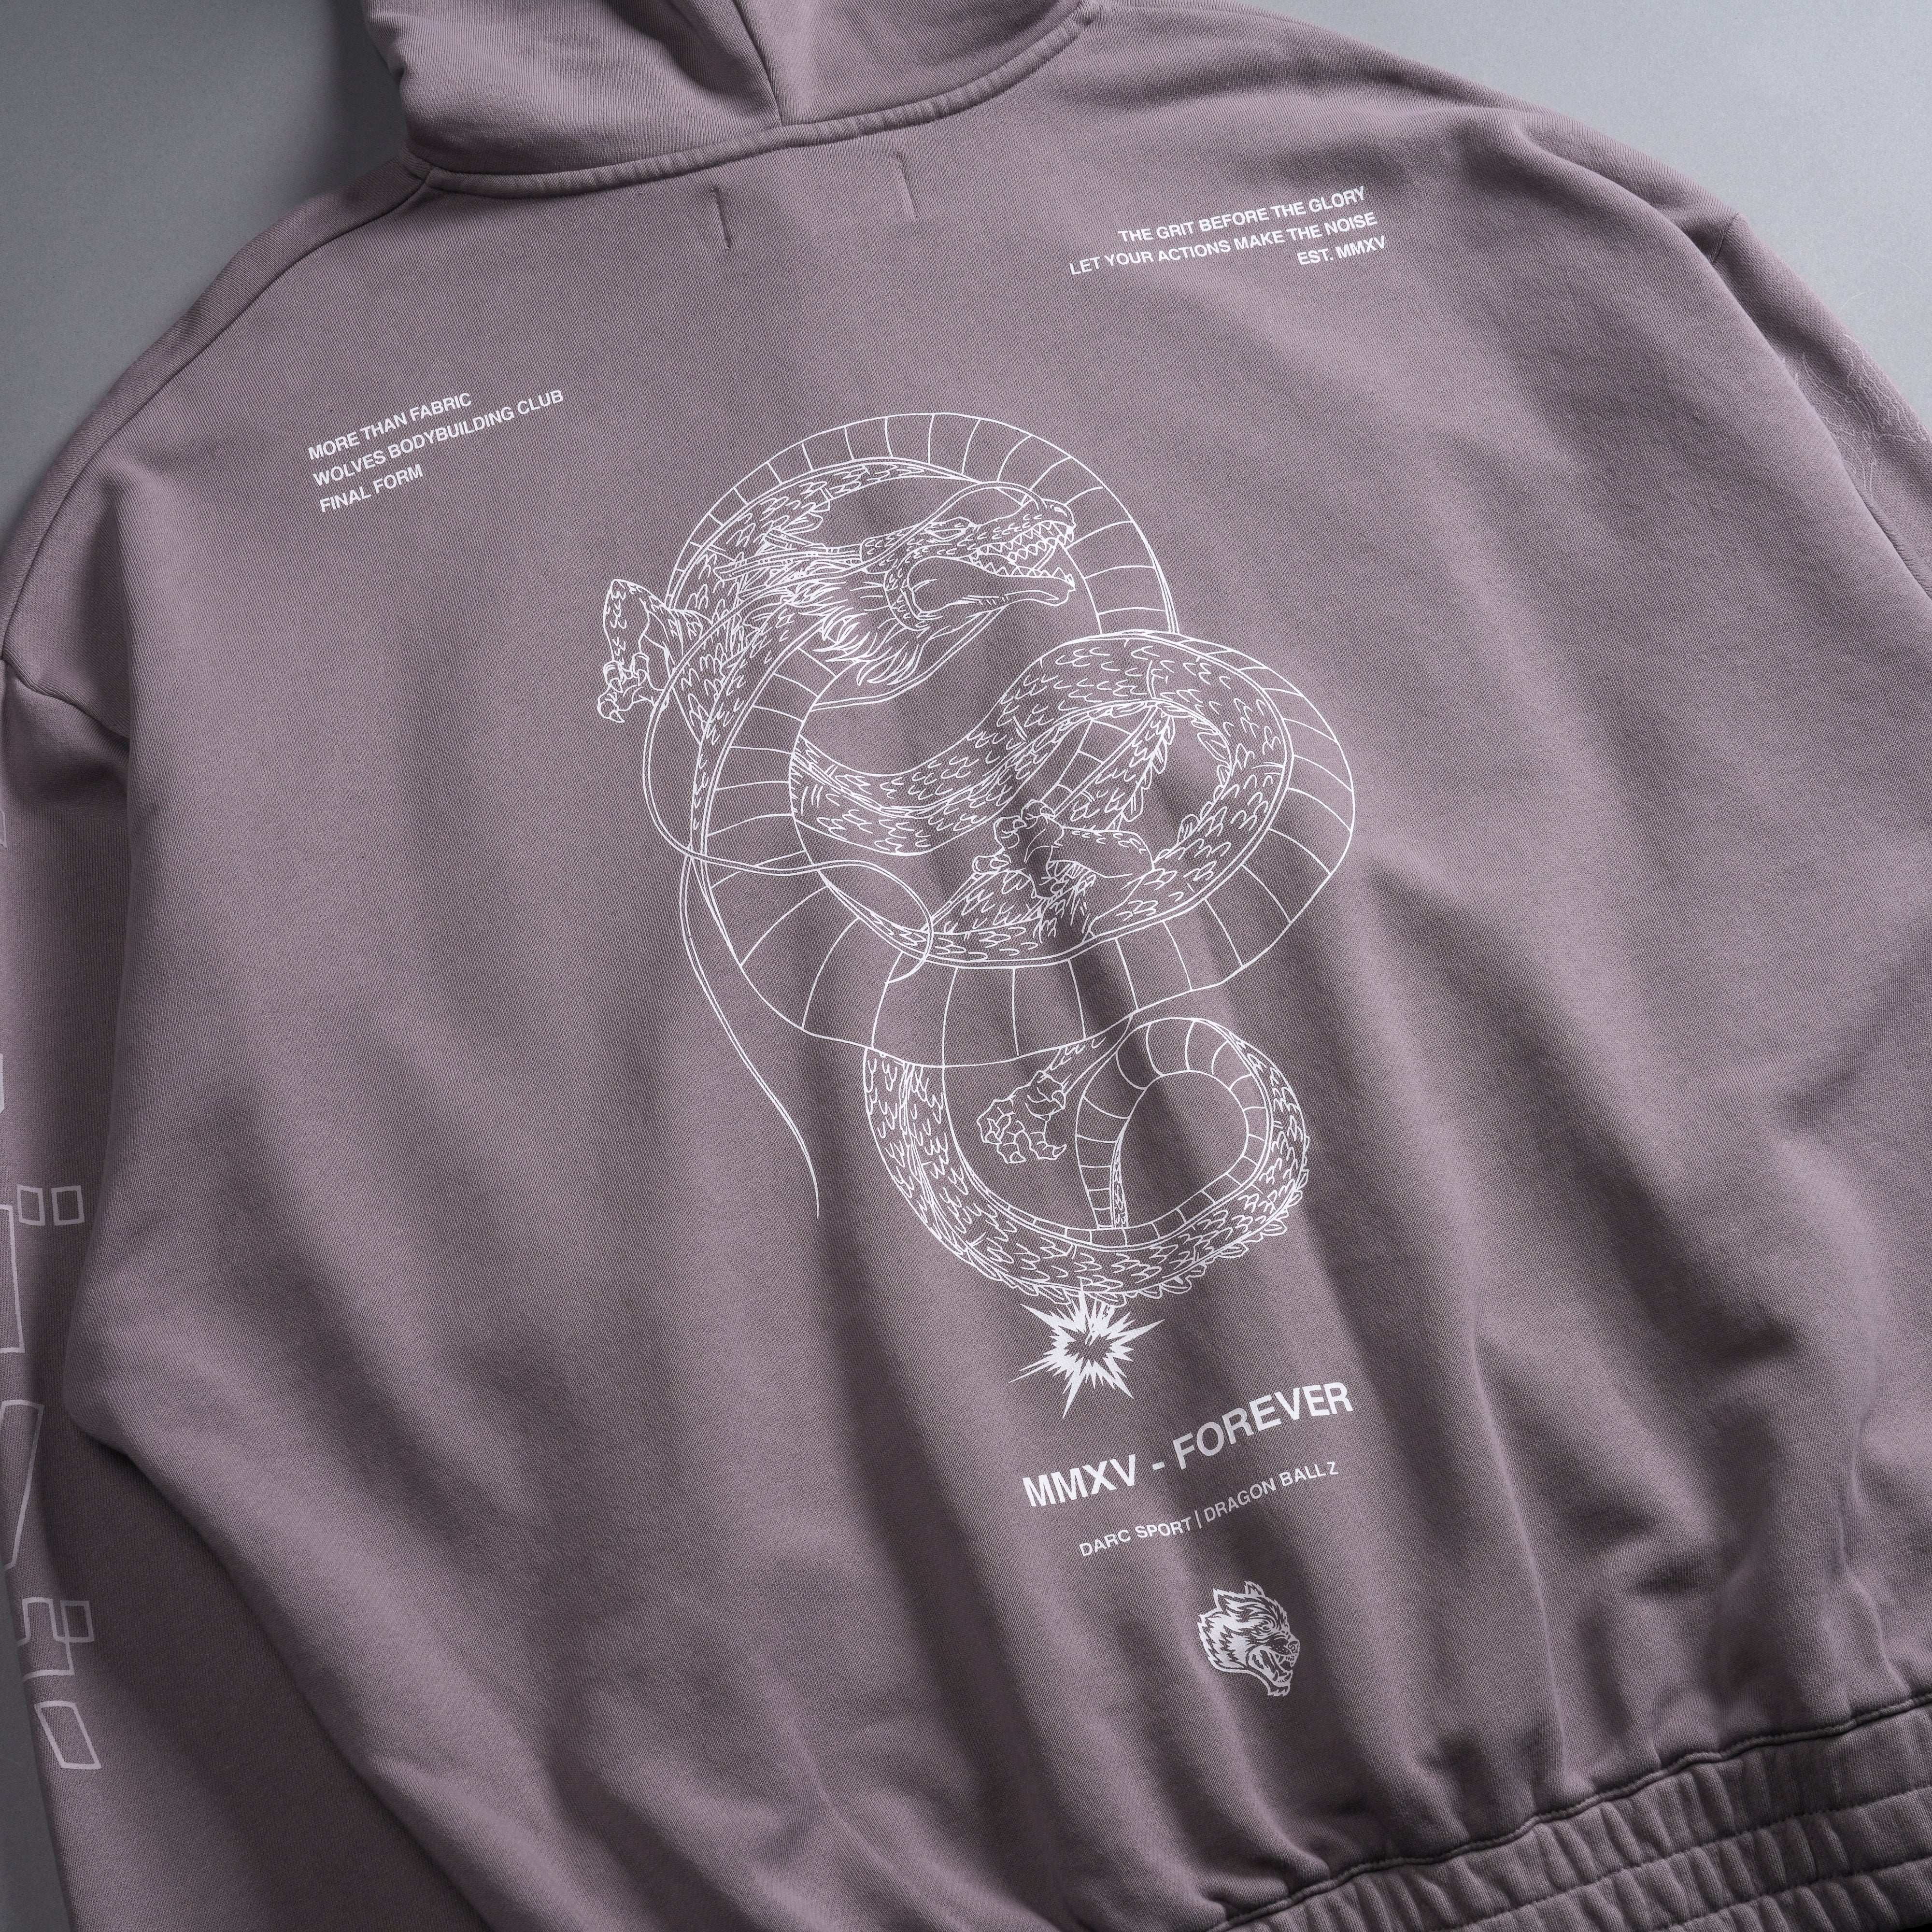 Shenron "Chambers" Zip Hoodie in Pale Gray